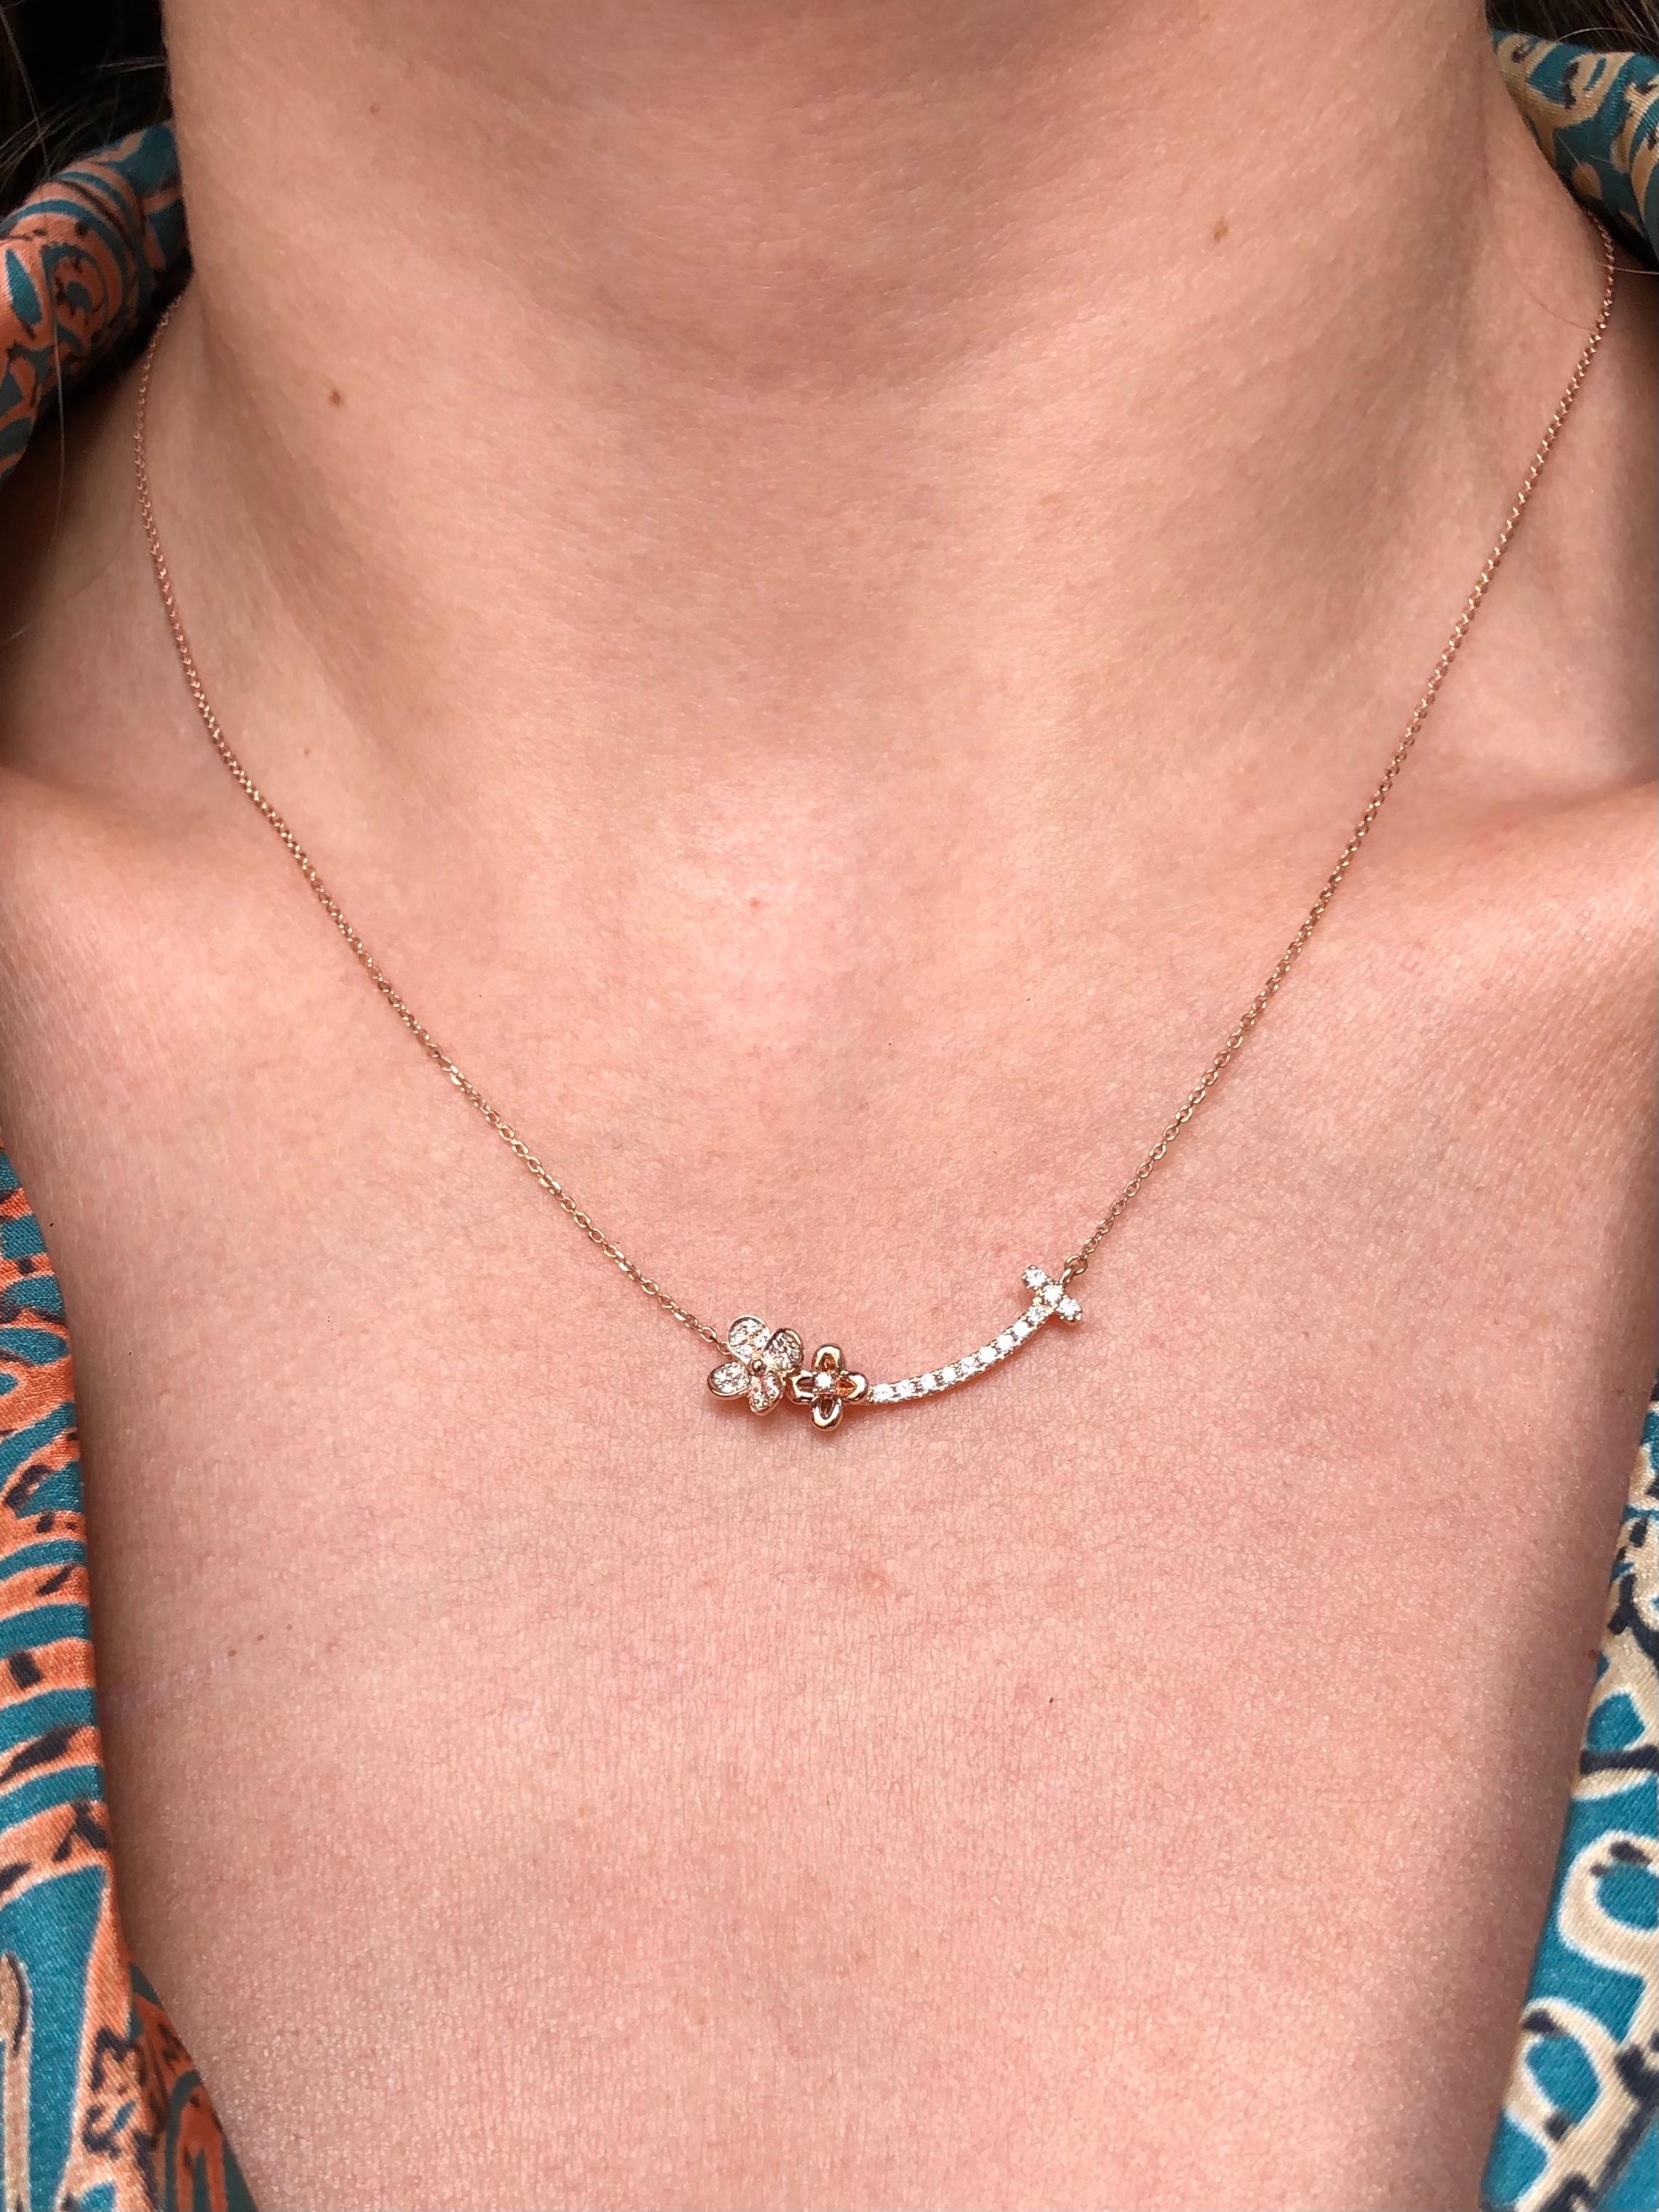 Let your style shine through with the sparkling combination of diamond Cluster Flower along with the Solitaire Gold Flower showcased in a Curved bar pendant necklace of gleaming Rose/white gold.

A Little Sparkle Provides the Finishing Touch, with